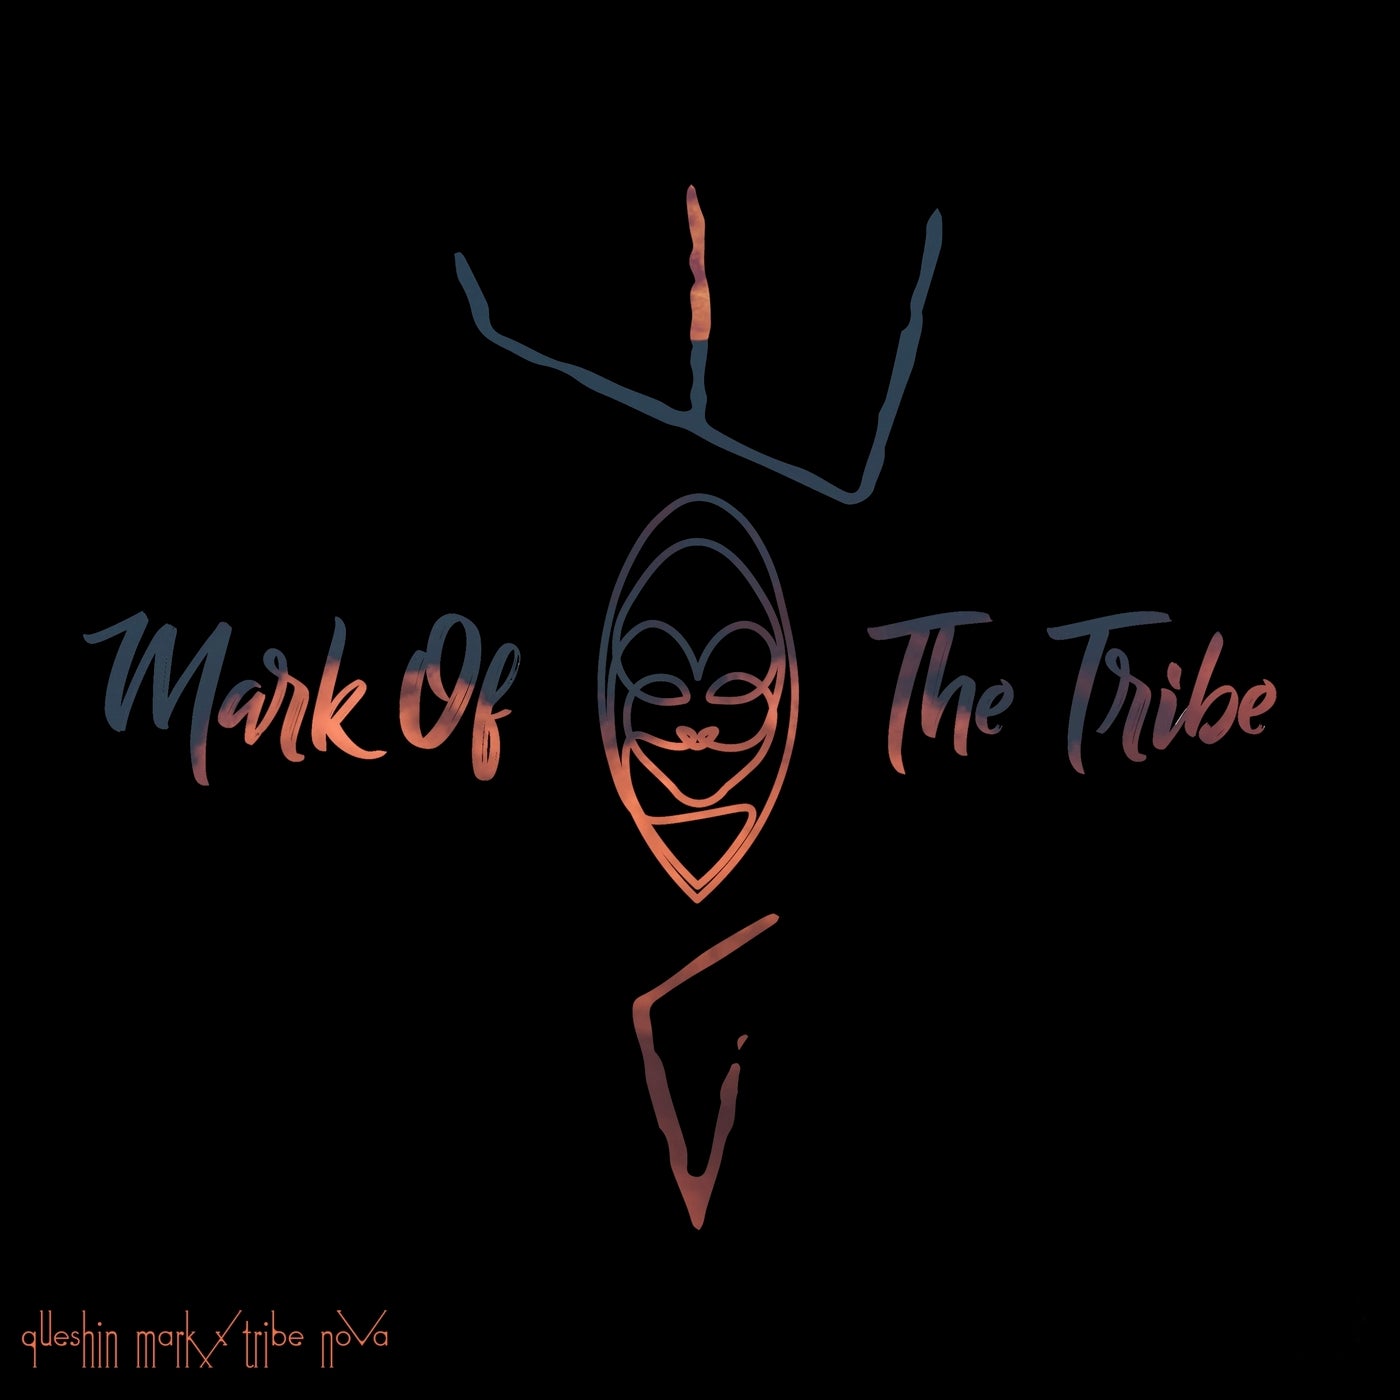 Mark of the Tribe